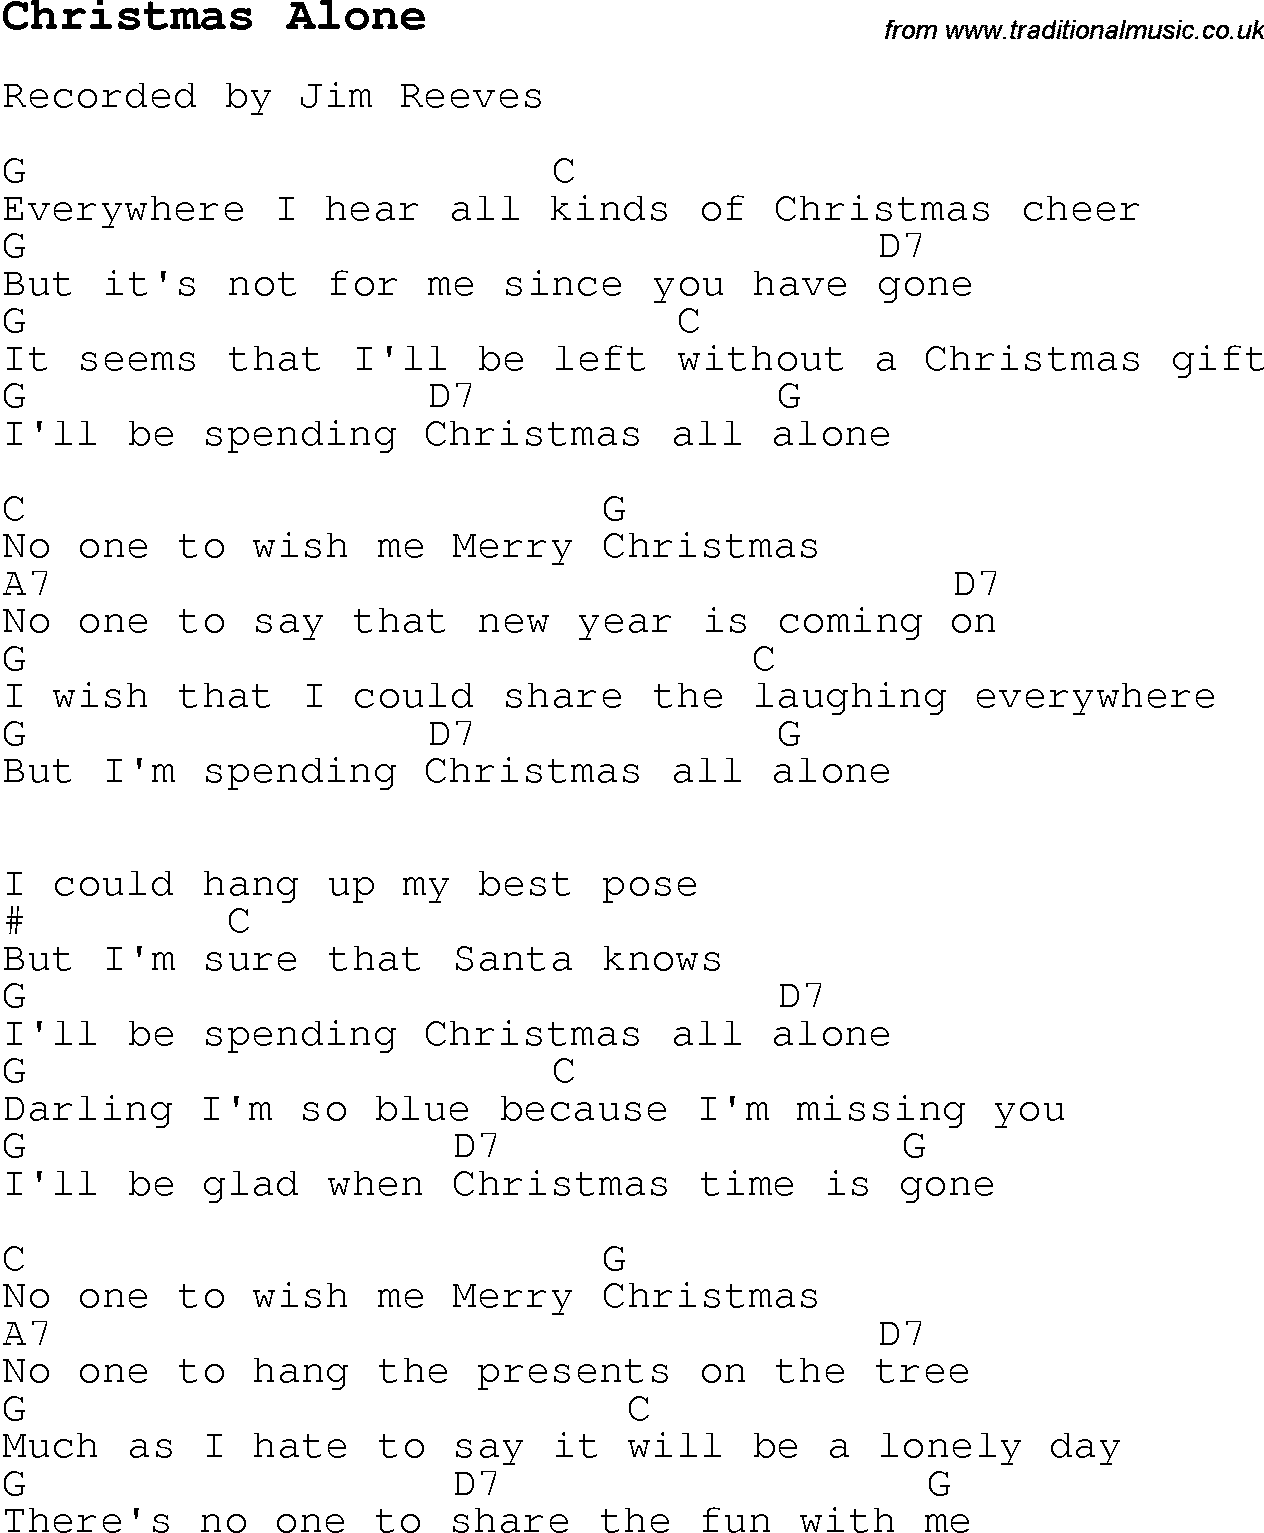 Christmas Songs and Carols, lyrics with chords for guitar banjo for Christmas Alone